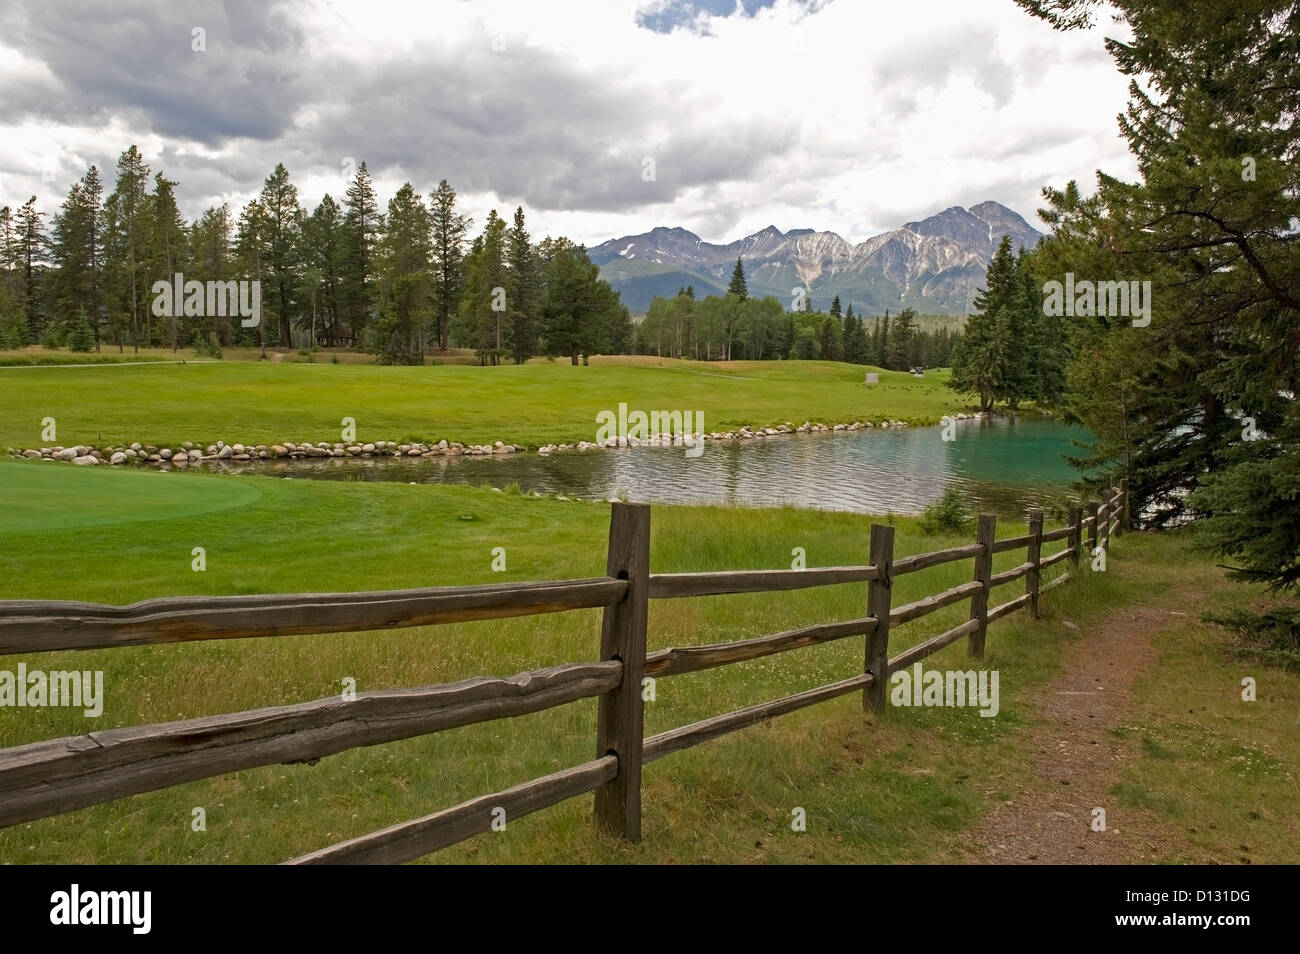 Green Grass Field Lake With The Mountains In The Distance; Alberta Canada Stock Photo